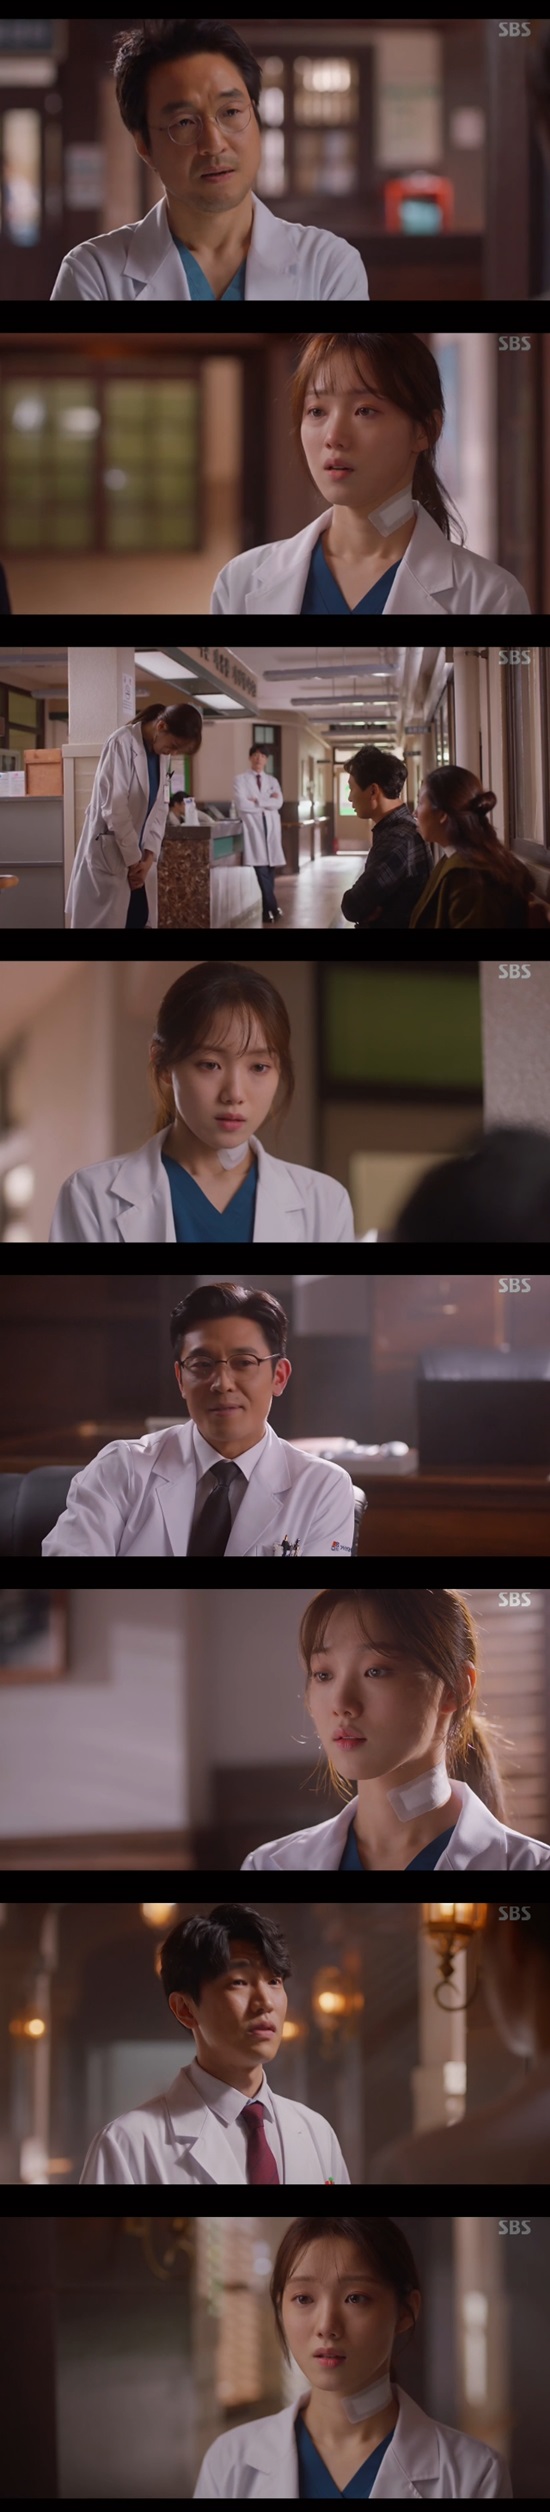 Lee Sung-kyung bent to Kim Ju-Huns will, but rather put it in fireDanger.In the 7th episode of SBSs Romantic Doctor Kim Sabu 2 broadcast on January 27 (playplayplay by Kang Eun-kyung/directed by Yoo In-sik, Lee Gil-bok), Cha Eun-jae (Lee Sung-kyung) bowed his head first after doing the right thing.Previously, Cha Eun-jae was hit by his wifes knife while trying to stop her husbands violence.My wife was brazenly trying to attack her husband who was angry with Cha Eun-jae and grabbed her hair with a cutter knife, and Cha Eun-jae was stabbed and hurt her neck while trying to stop her.Fortunately, I did not touch the important part, so I stopped at the 7 stitch line, but the work has grown since.The violent husband lied that Cha Eun-jae walked Sibi first and his wife wielded a knife to protect him.My wife could not say anything, and the situation on CCTV also seemed to be that Cha Eun-jae first gave Sibi to the violent husband.Park Min-guk (Kim Ju-Hun) apologized for Cha Eun-jae and tried to fix things, and Kim Sa-bu confronted him that he should call the police.Cha said, I do not want to get bigger. Kim said, What kind of apology does a person who is hurt by the weak who is being abused do not know what to do? I knelt down because I was uncomfortable, I was worried about problems.If all of these excuses make it easier and natural, you will live such a cheap life that you can afford any life. Cha said, The leap is too bad, and Kim said, Well, then go down and kneel. It will be a medicine to go through.After apologizing to his violent husband, Cha Eun-jae met Park Min-guk and realized that Kim Sa-bus step was not a leap but a reality.Park Min-guk praised him as a friend who knows social life more than he looks. He asked, Is there a lot of trouble because of surgery?When Cha Eun-jae said that he had taken Kims medicine and had the surgery done properly, Park Min-guk suddenly said, When will you marry the next teacher? I wonder when he will quit.Honestly, there are not many people who keep up with the writing of female teachers. Park Min-guk said, If you have a professional certificate and have been suffering for 1-2 years, marry or get pregnant if you use it.If I throw away a few years to give birth, it will eventually be the remaining teachers. So I do not raise women teachers well.If you are a female doctor with a surgeries there, is it even more? Cha Eun-jae, who did not say a word about his marriage, told Park Min-guk, I will give you an hour.I realized that I had been treated like that at that moment, and I was despairing, saying, It was a cheap life to be treated like that.Yoo Gyeong-sang